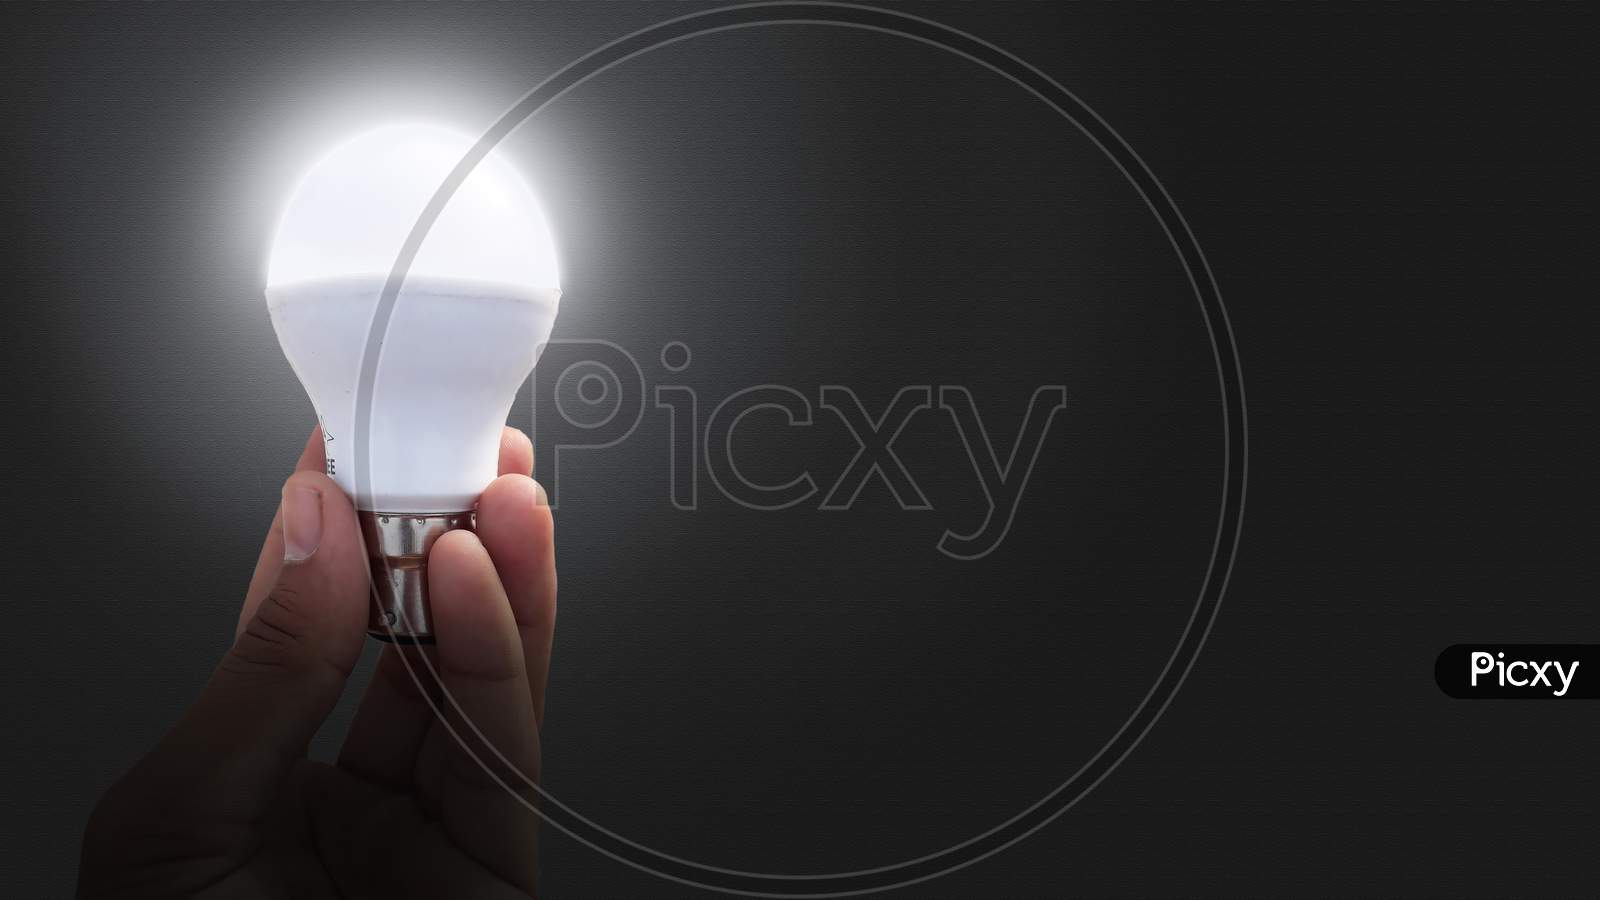 A white glowing LED bulb hold in hand on textured background / motivational background or image